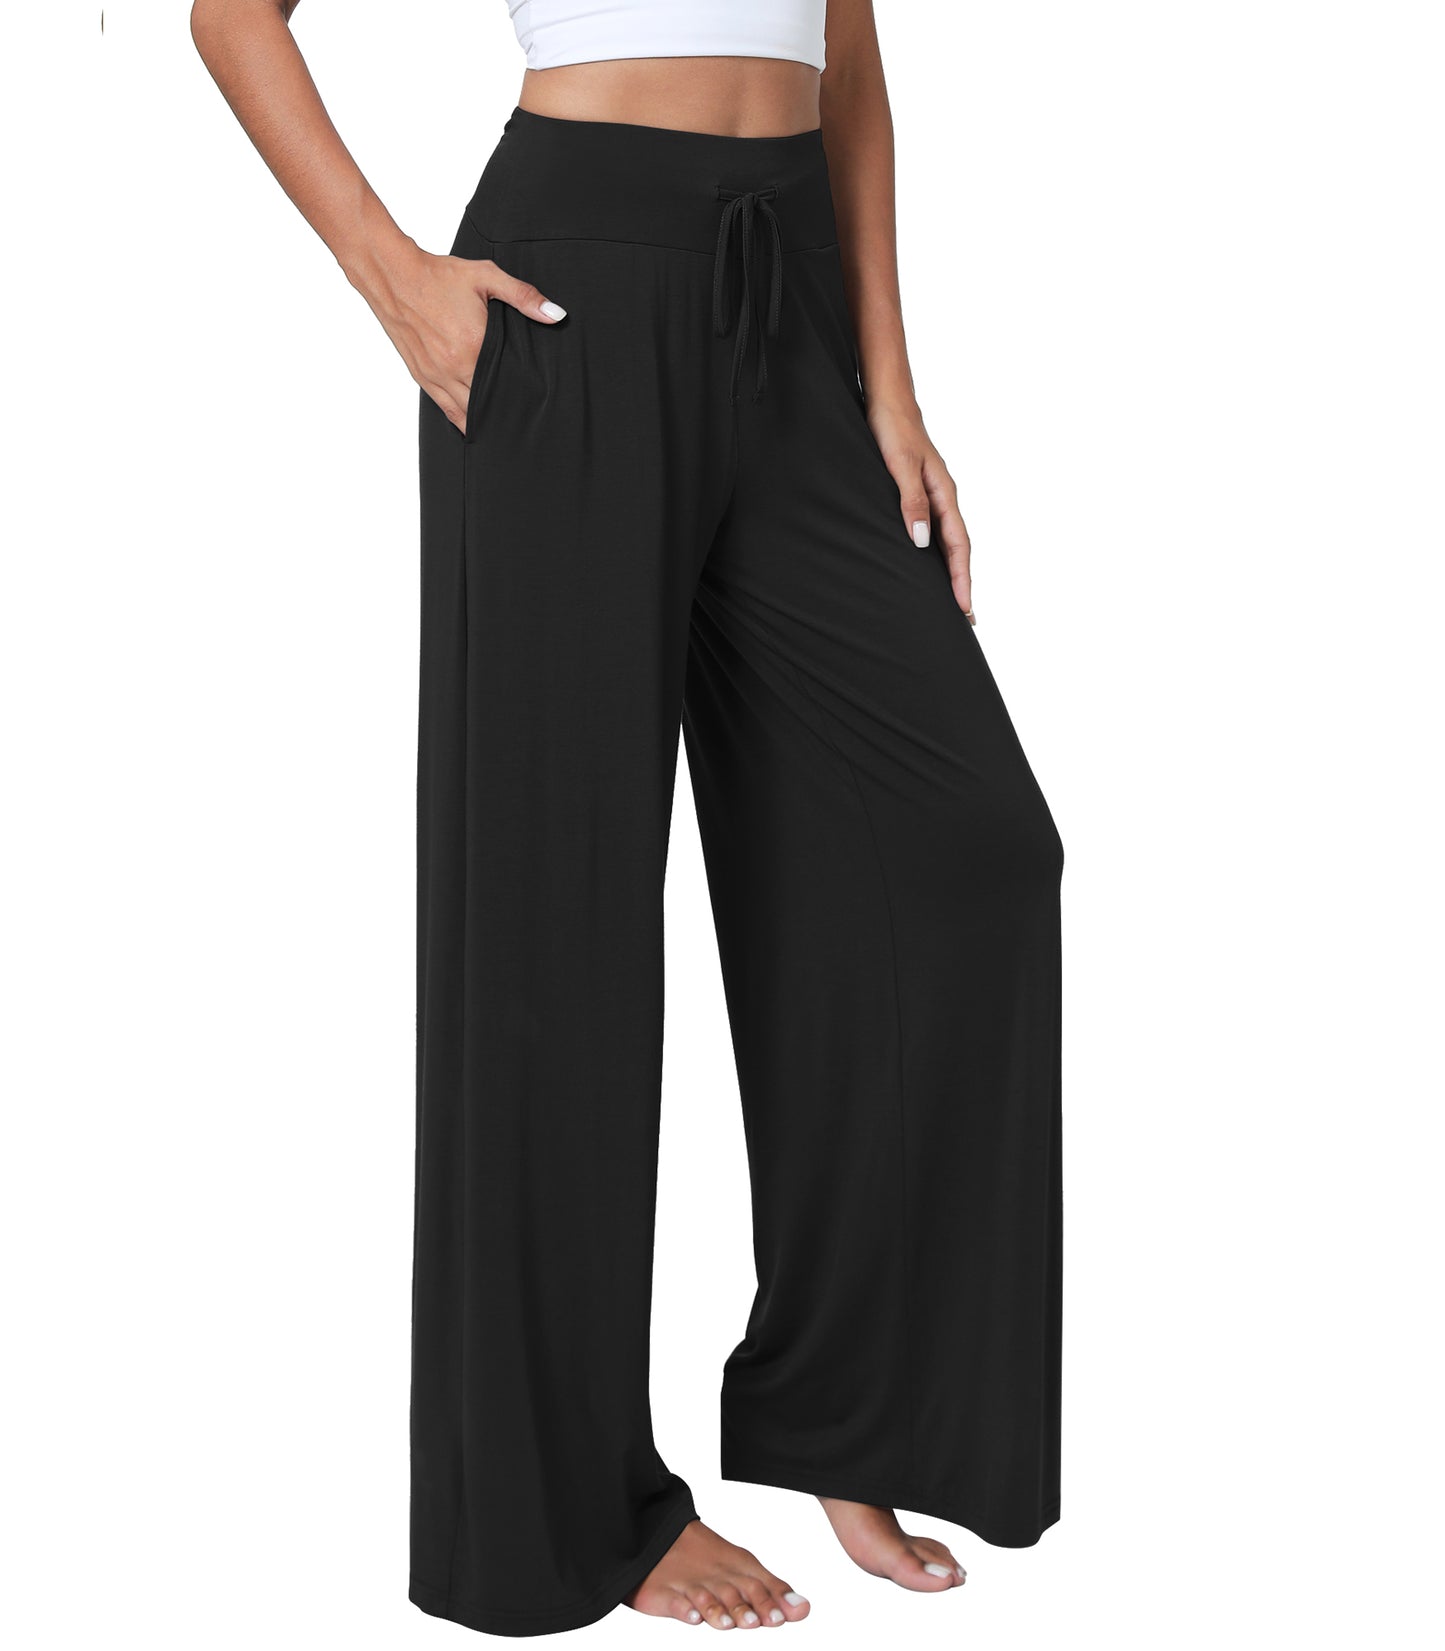 WiWi Women's Bamboo Pajama Pants Casual Drawstring Palazzo Lounge Pants  Loose Comfy Wide Leg Bottoms with Pockets S-XXL